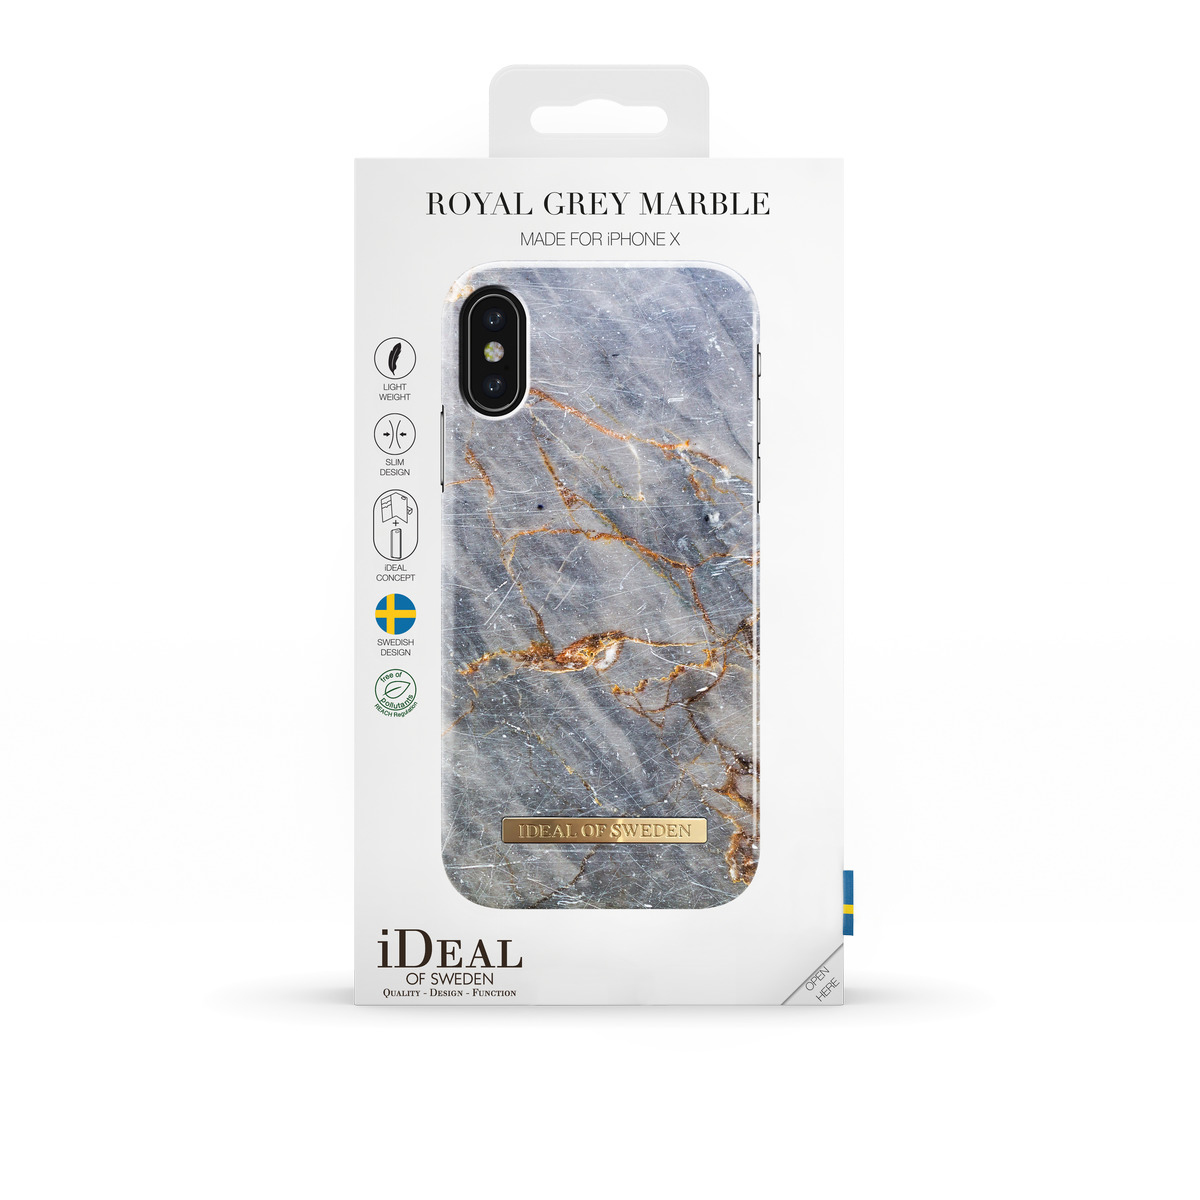 iPhone Backcover, X, OF Apple, Fashion, SWEDEN IDEAL Marble Grey